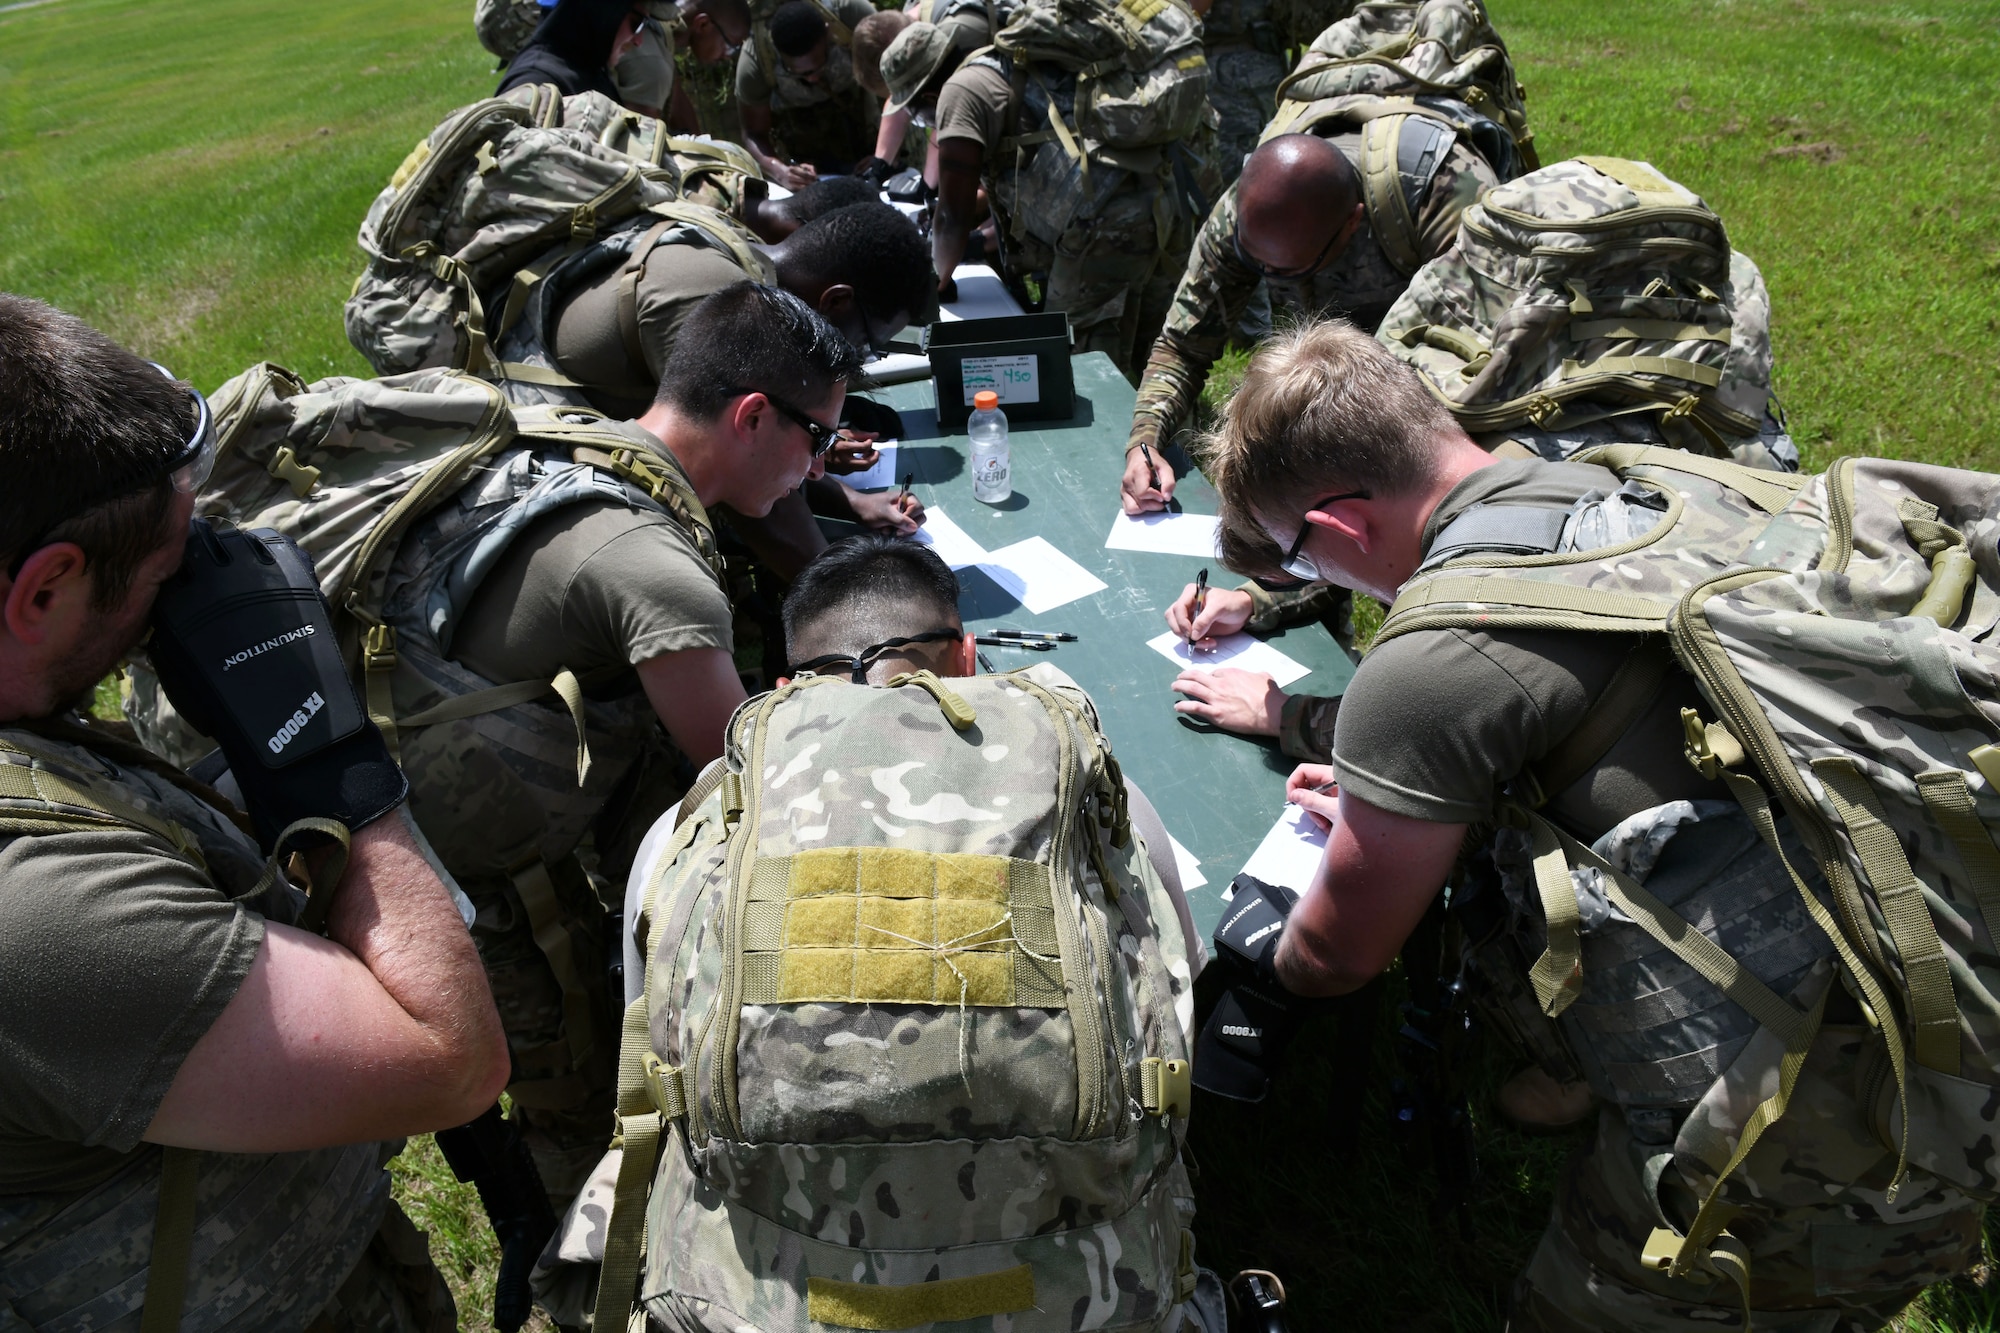 Military members taking a test